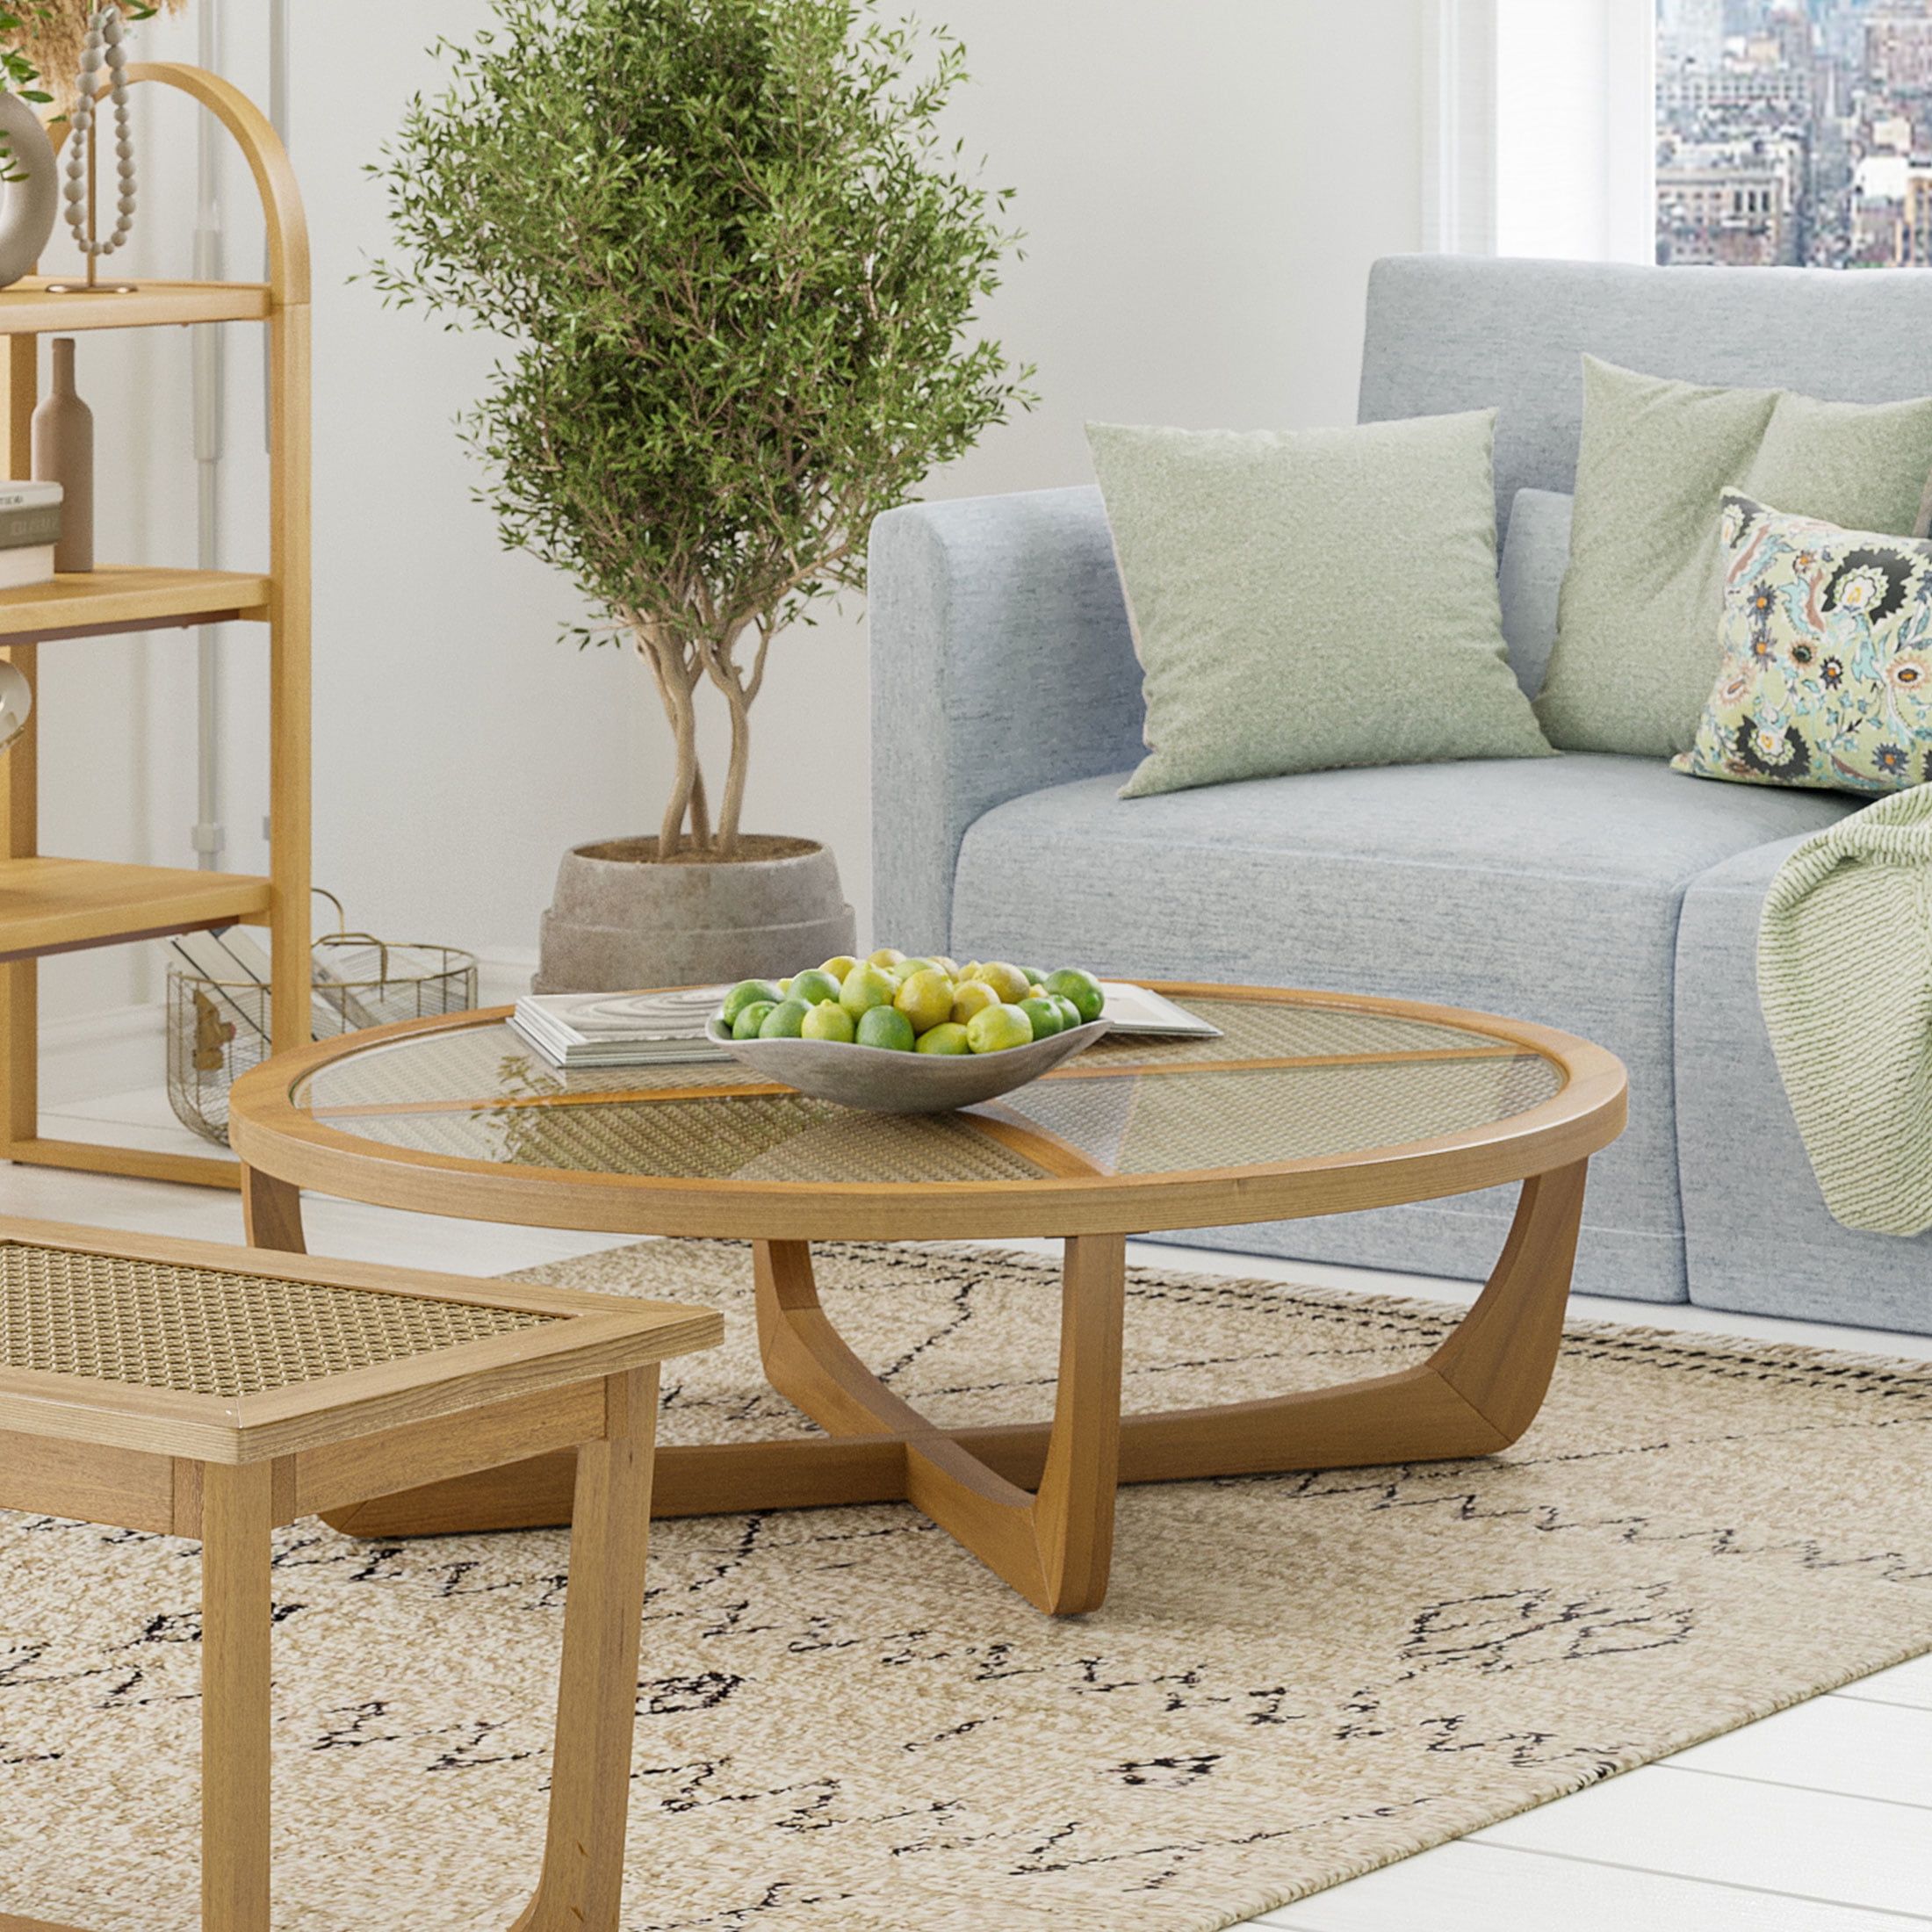 Beautiful Rattan & Glass Coffee Table With Solid Wood Framedrew  Barrymore – Walmart Pertaining To Latest Rattan Coffee Tables (View 4 of 10)